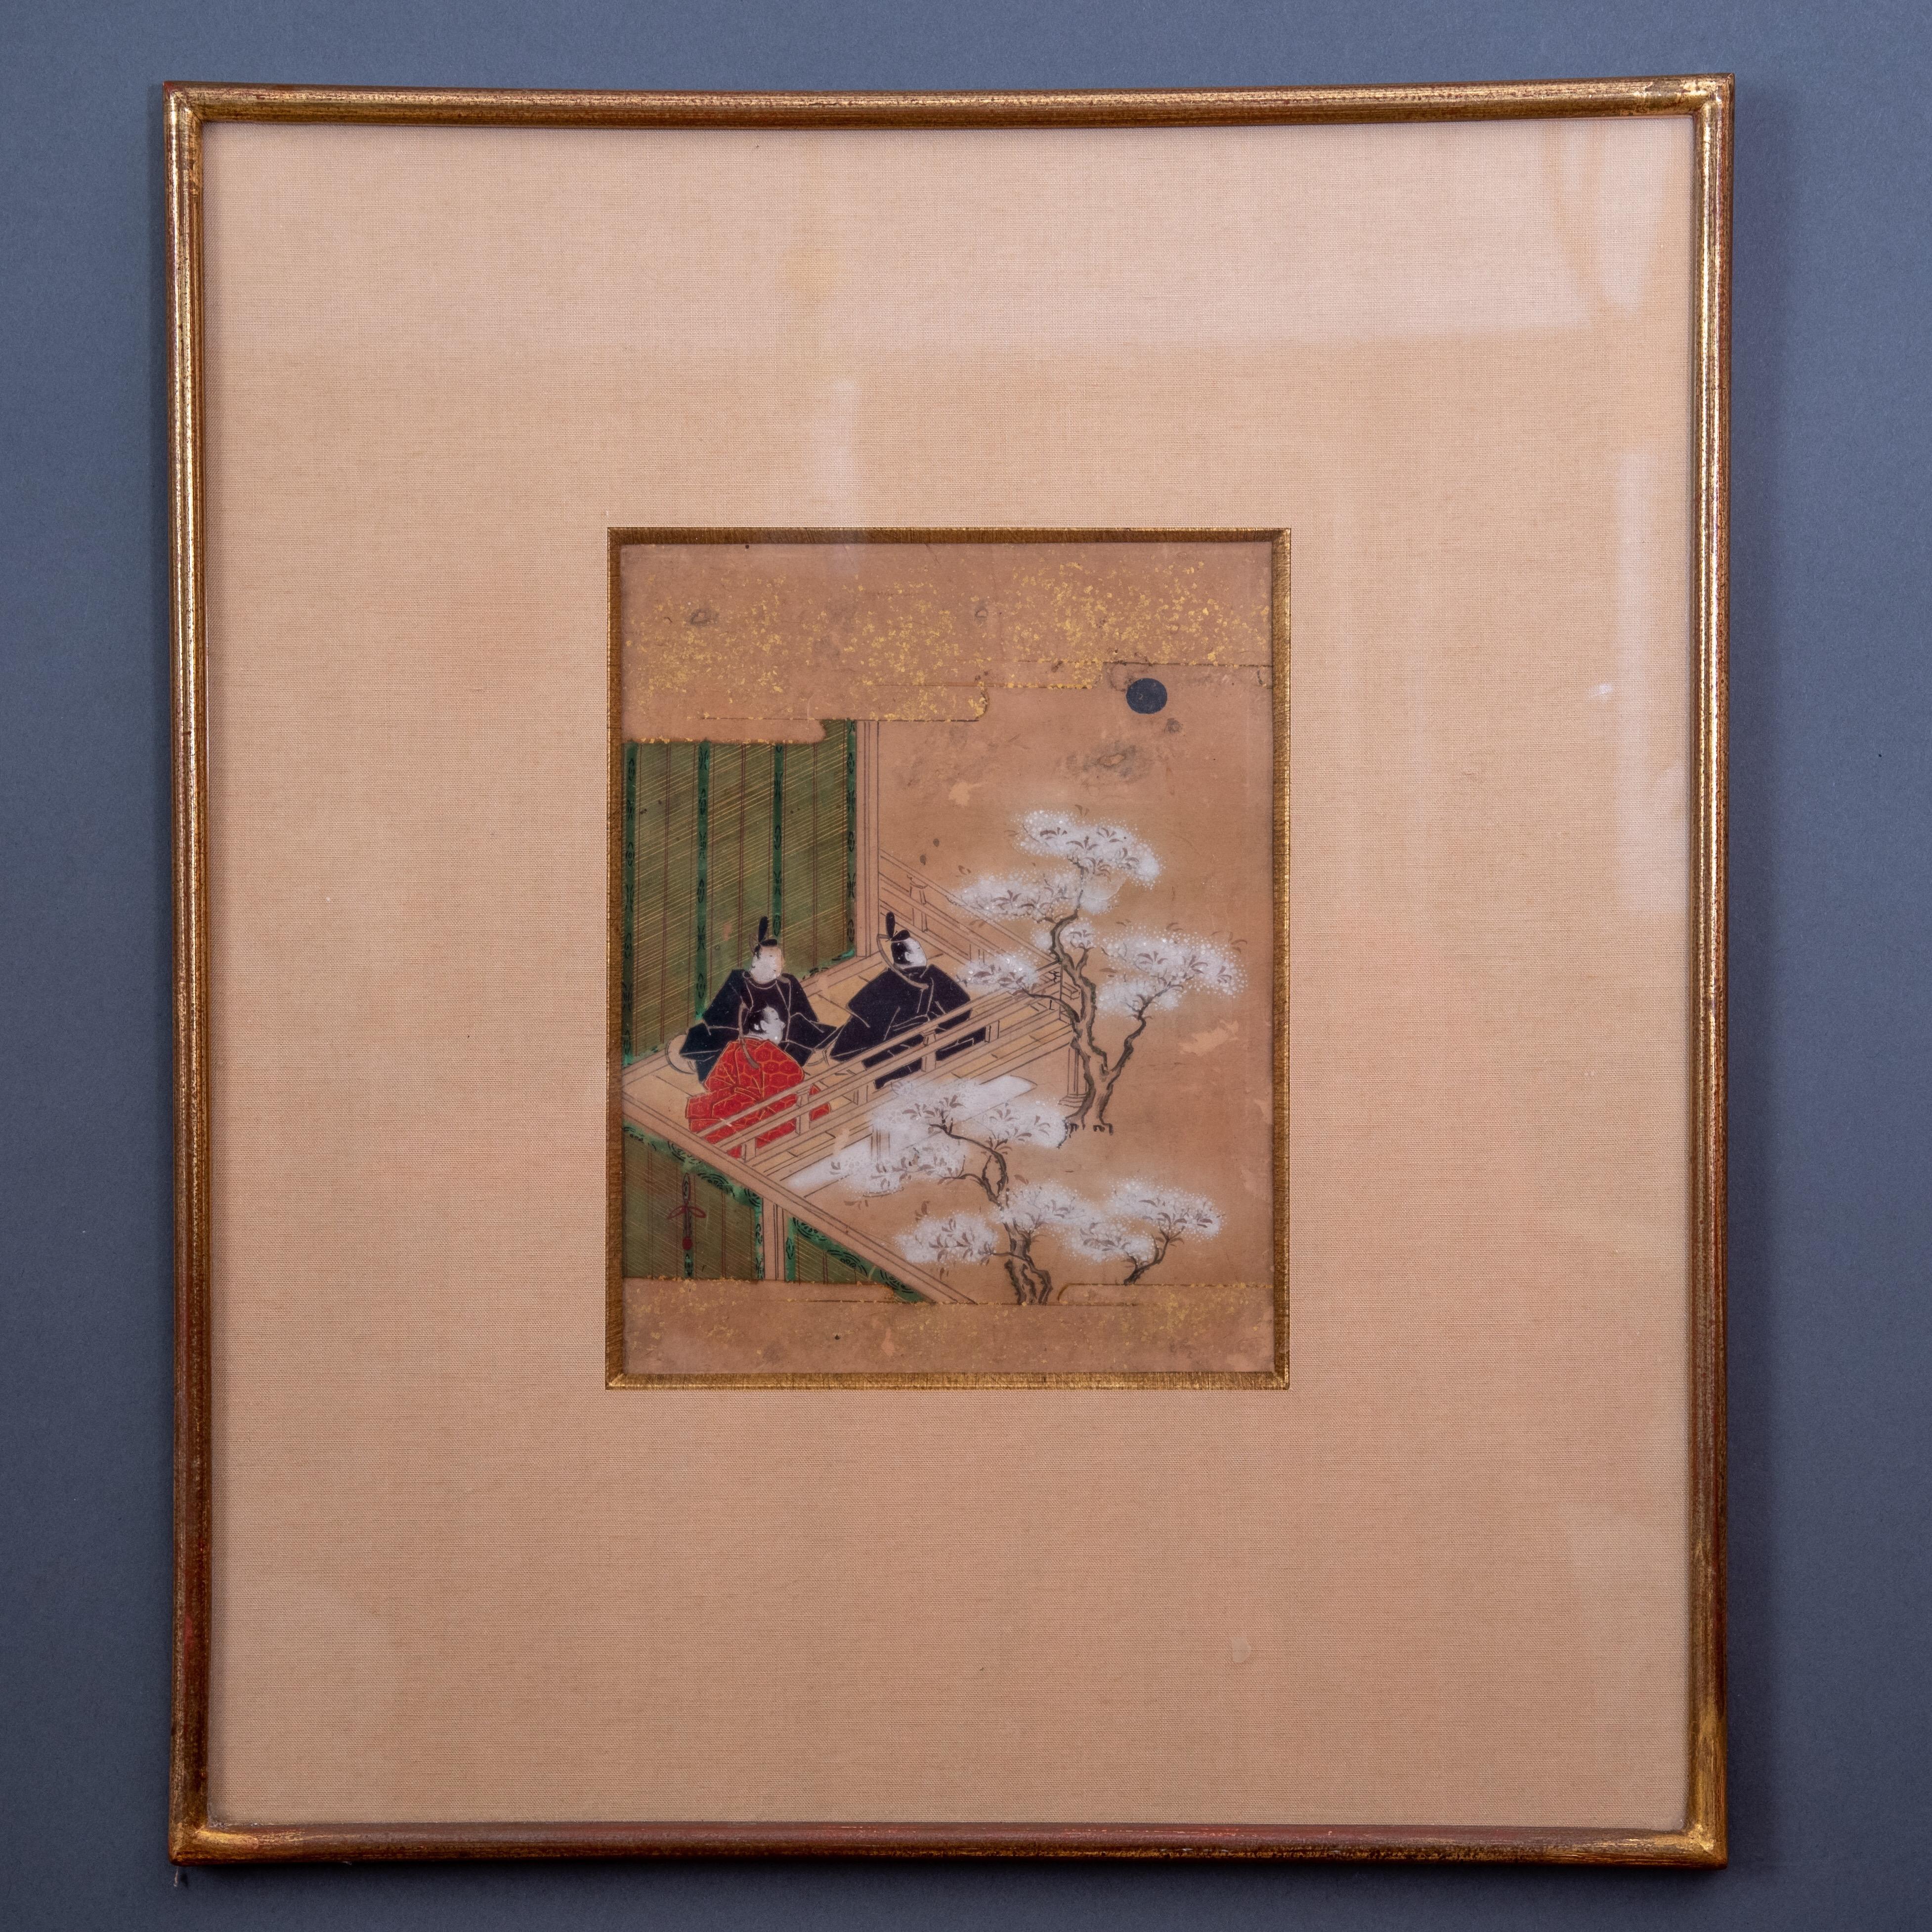 The painting depicts three Shinto priests on a terrace in meditation.
Edo period, 18th century.

Ink and color paper and gold flakes. 
It is under glass and has a giltwood frame.
Edo period, 18th century.
Probably based on a book called 